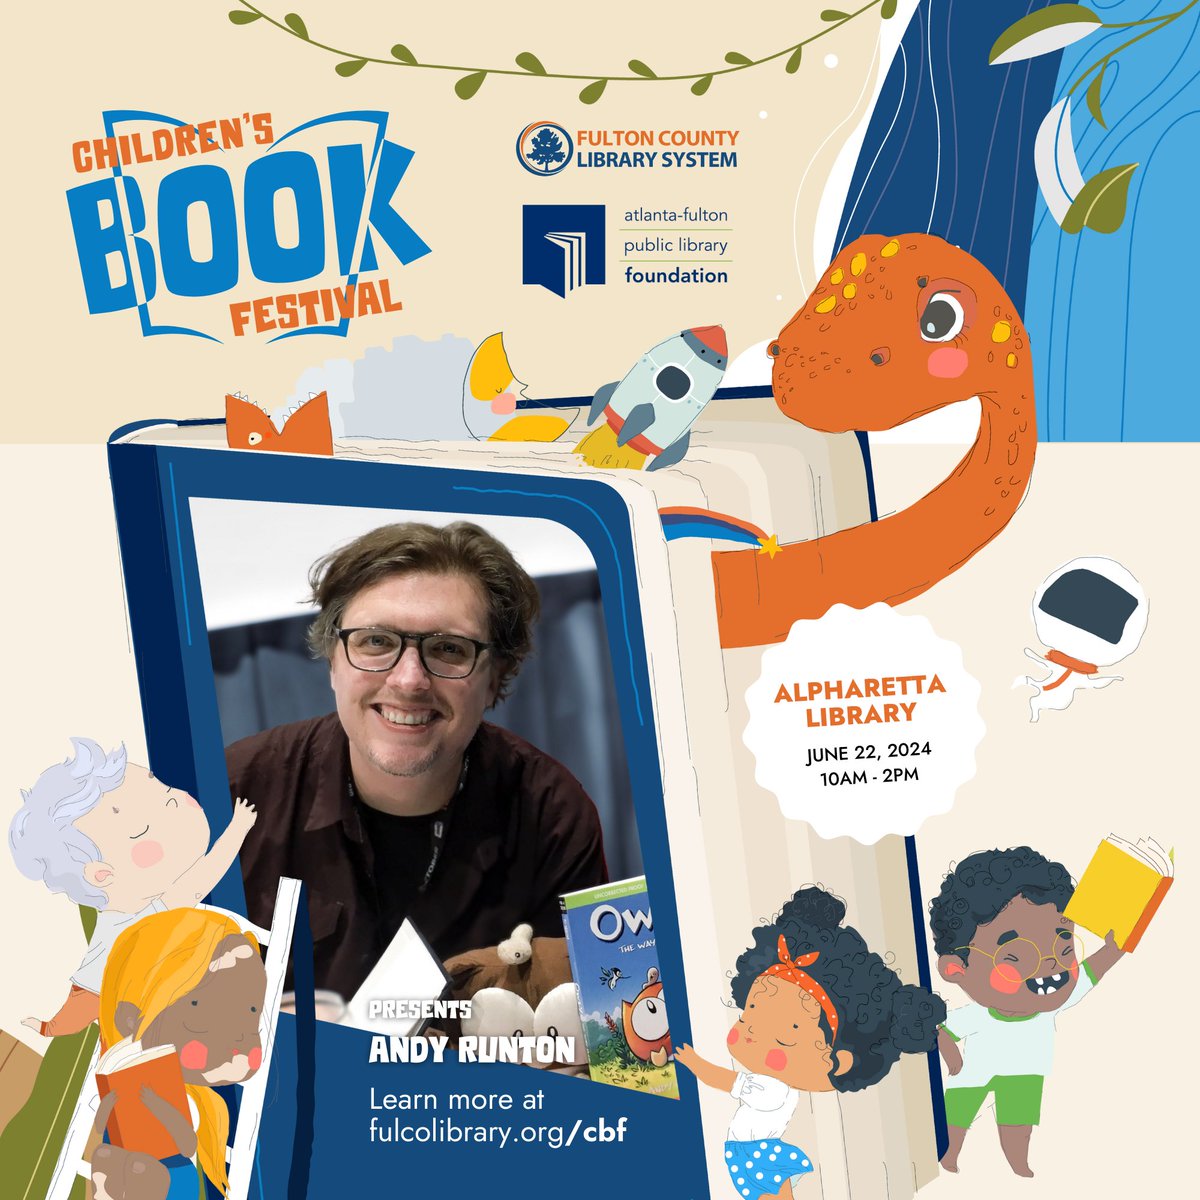 Exciting news! Meet Andy Runton, creator of 'Owly' at the Fulcolibrary Children's Book Festival 2024. Check Fulcolibrary.org/CBF for more details.

#AndyRunton #Childrensbookfestival #CBF24 #Fulcolibrary #Authortalks #owly #Books #reading #kids #family